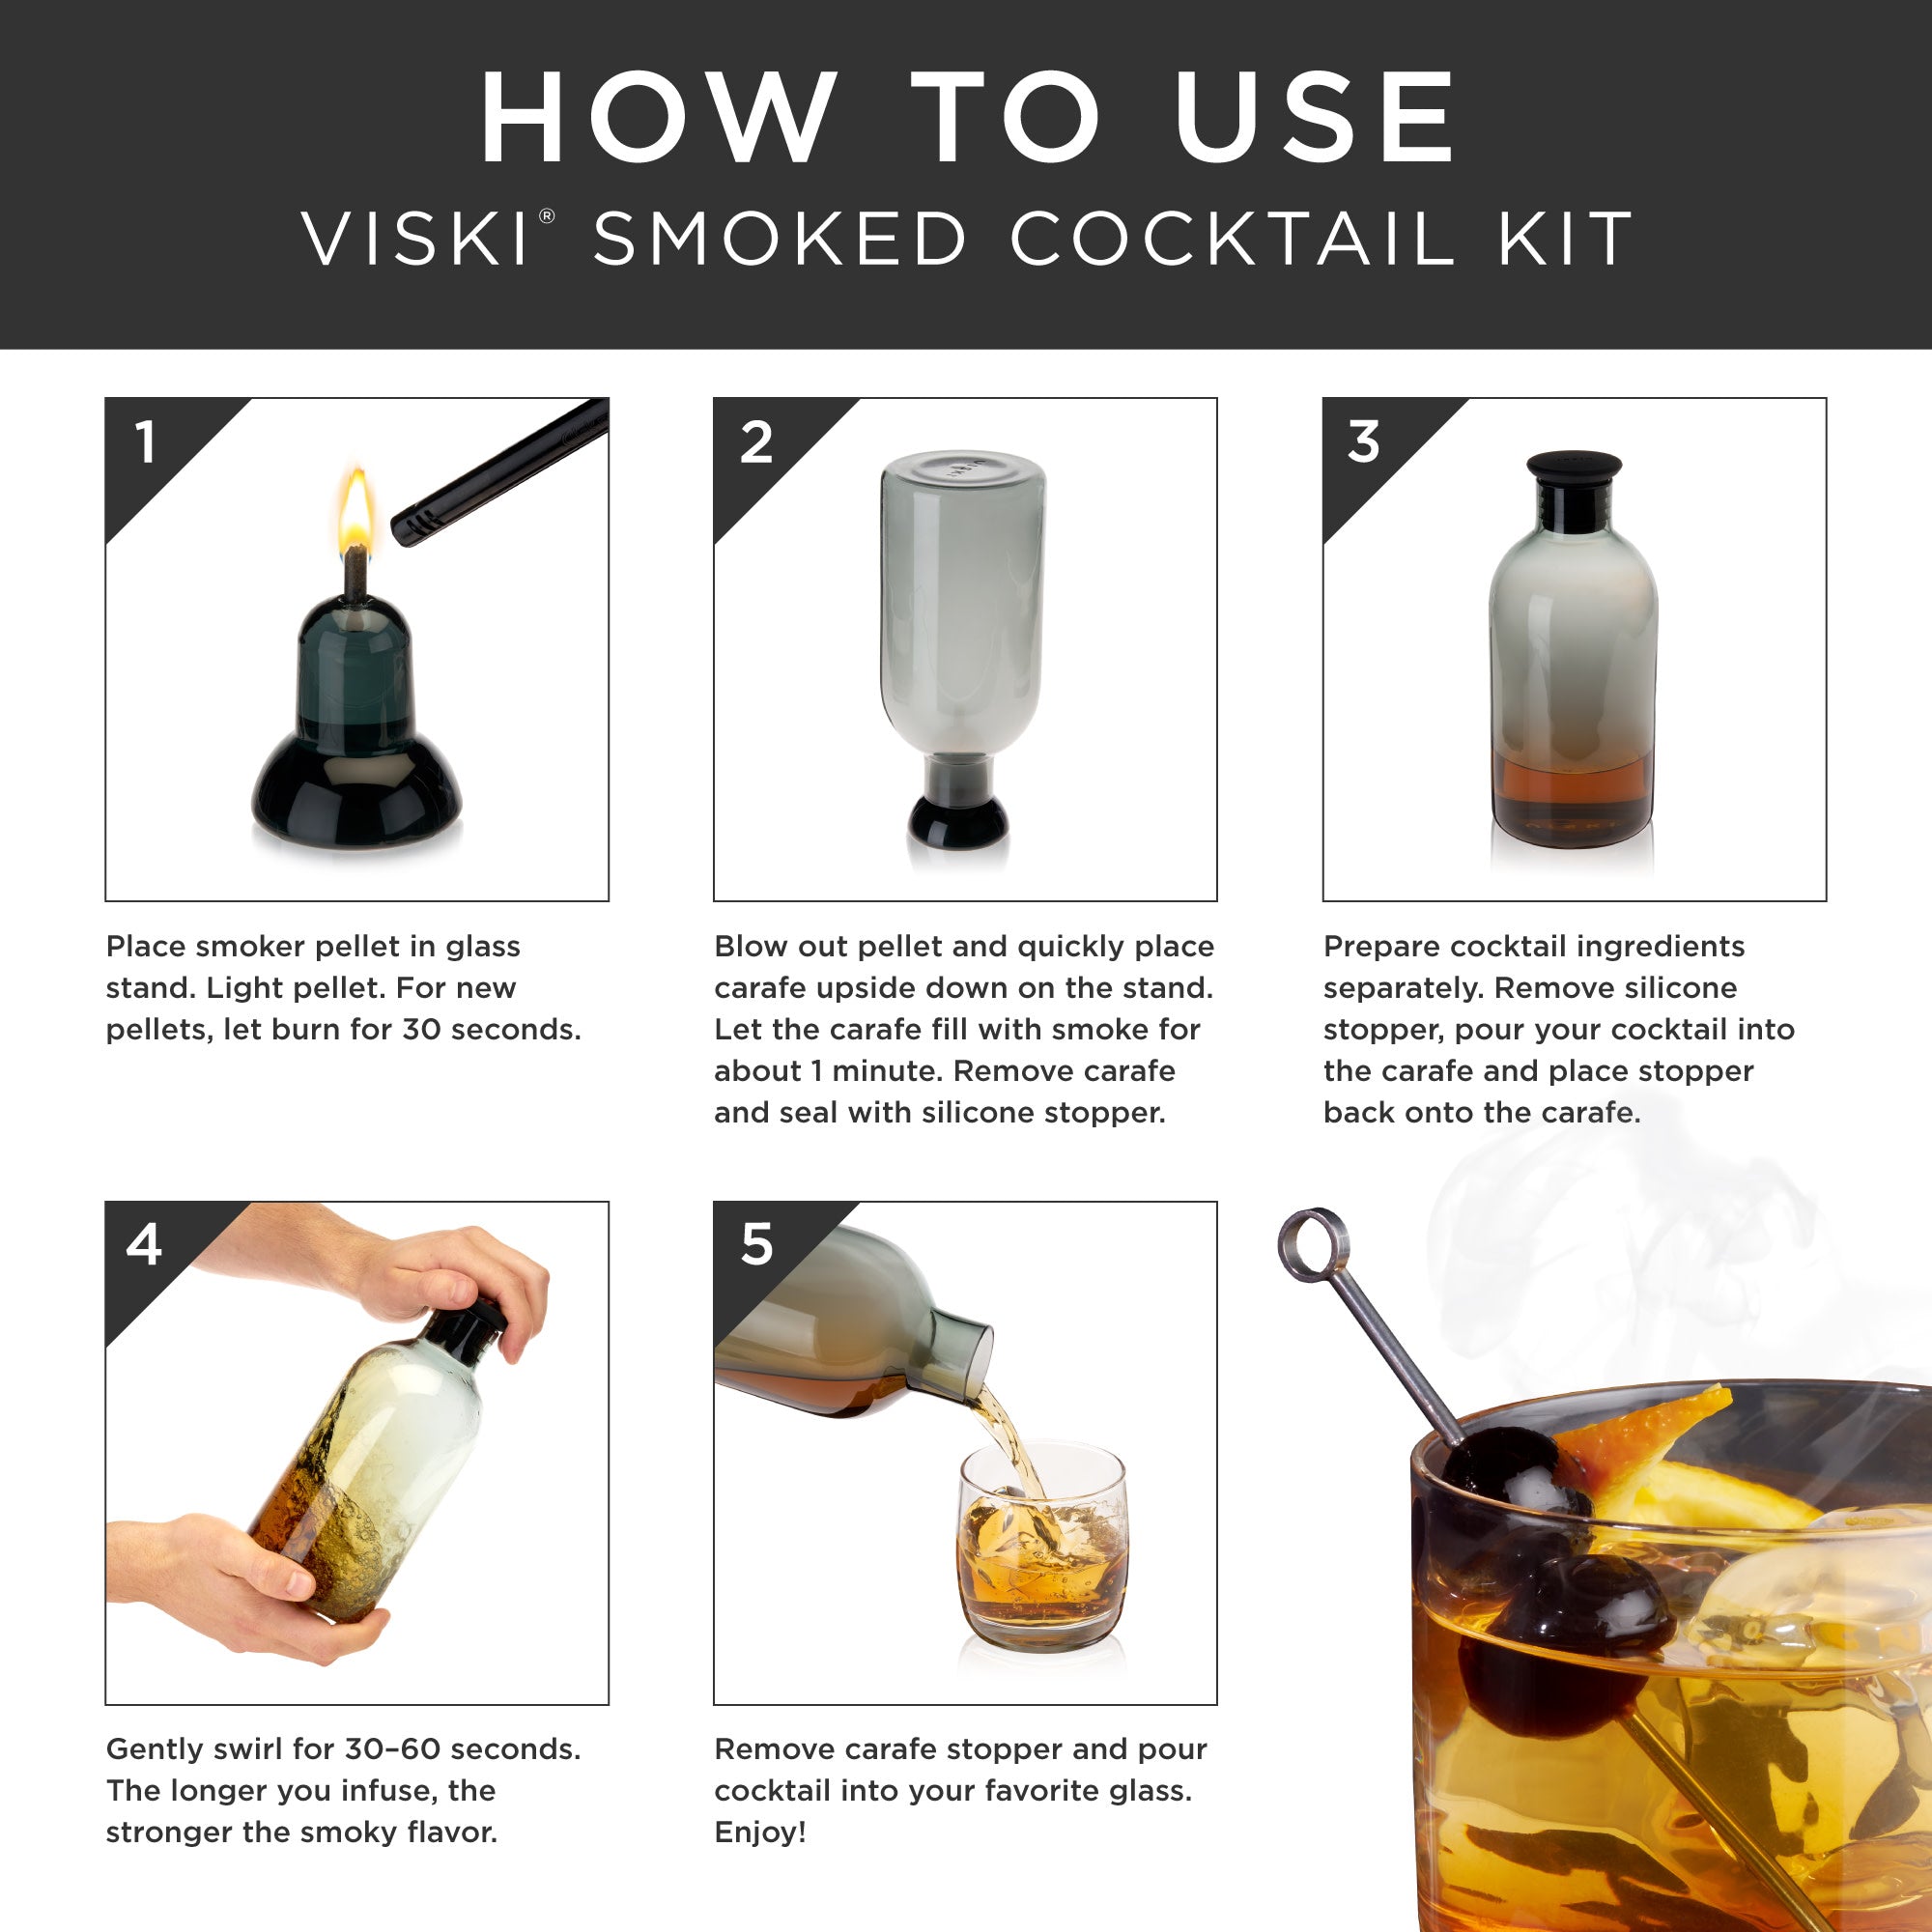 Whiskey Cocktail Kit - Mix up an Old Fashioned